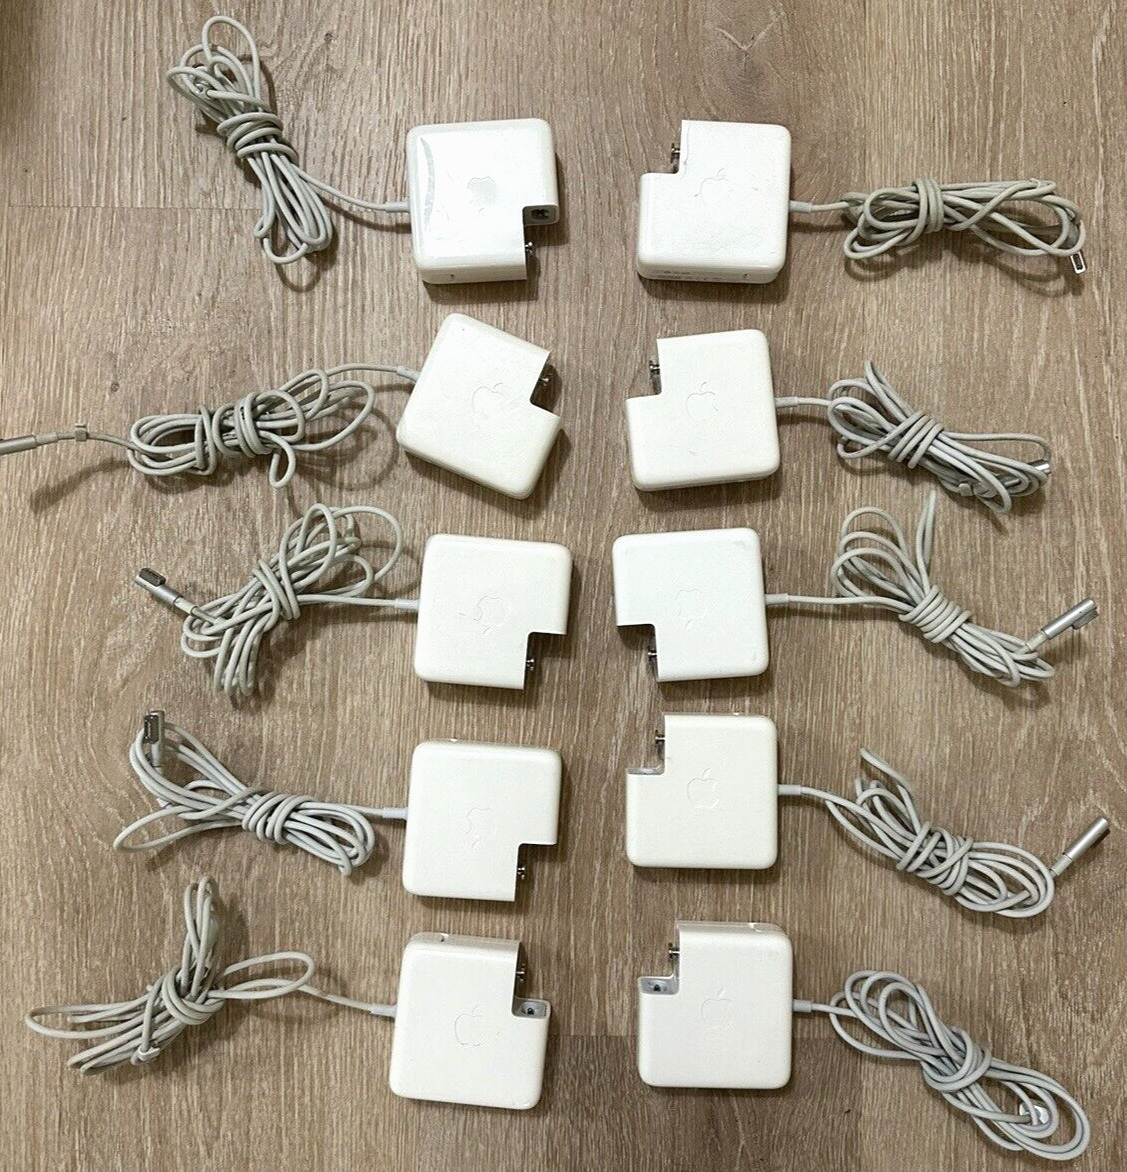 Genuine OEM Apple A1184 MagSafe 1 60W with Extenders - LOT OF 10 🔥🔥🔥 🍎💻